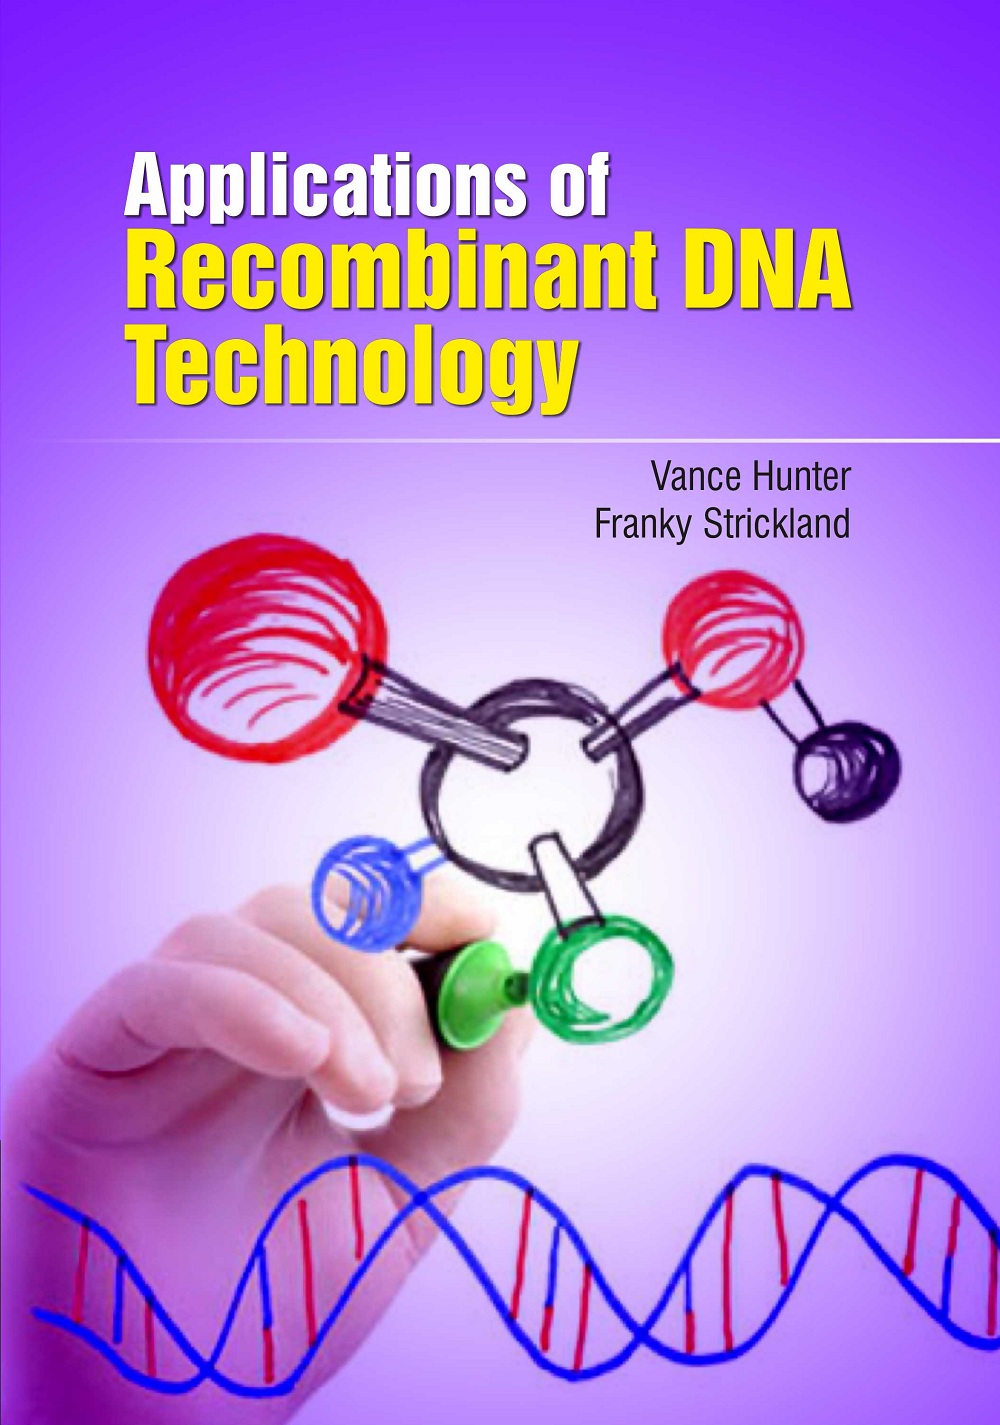 Applications of Recombinant DNA Technology